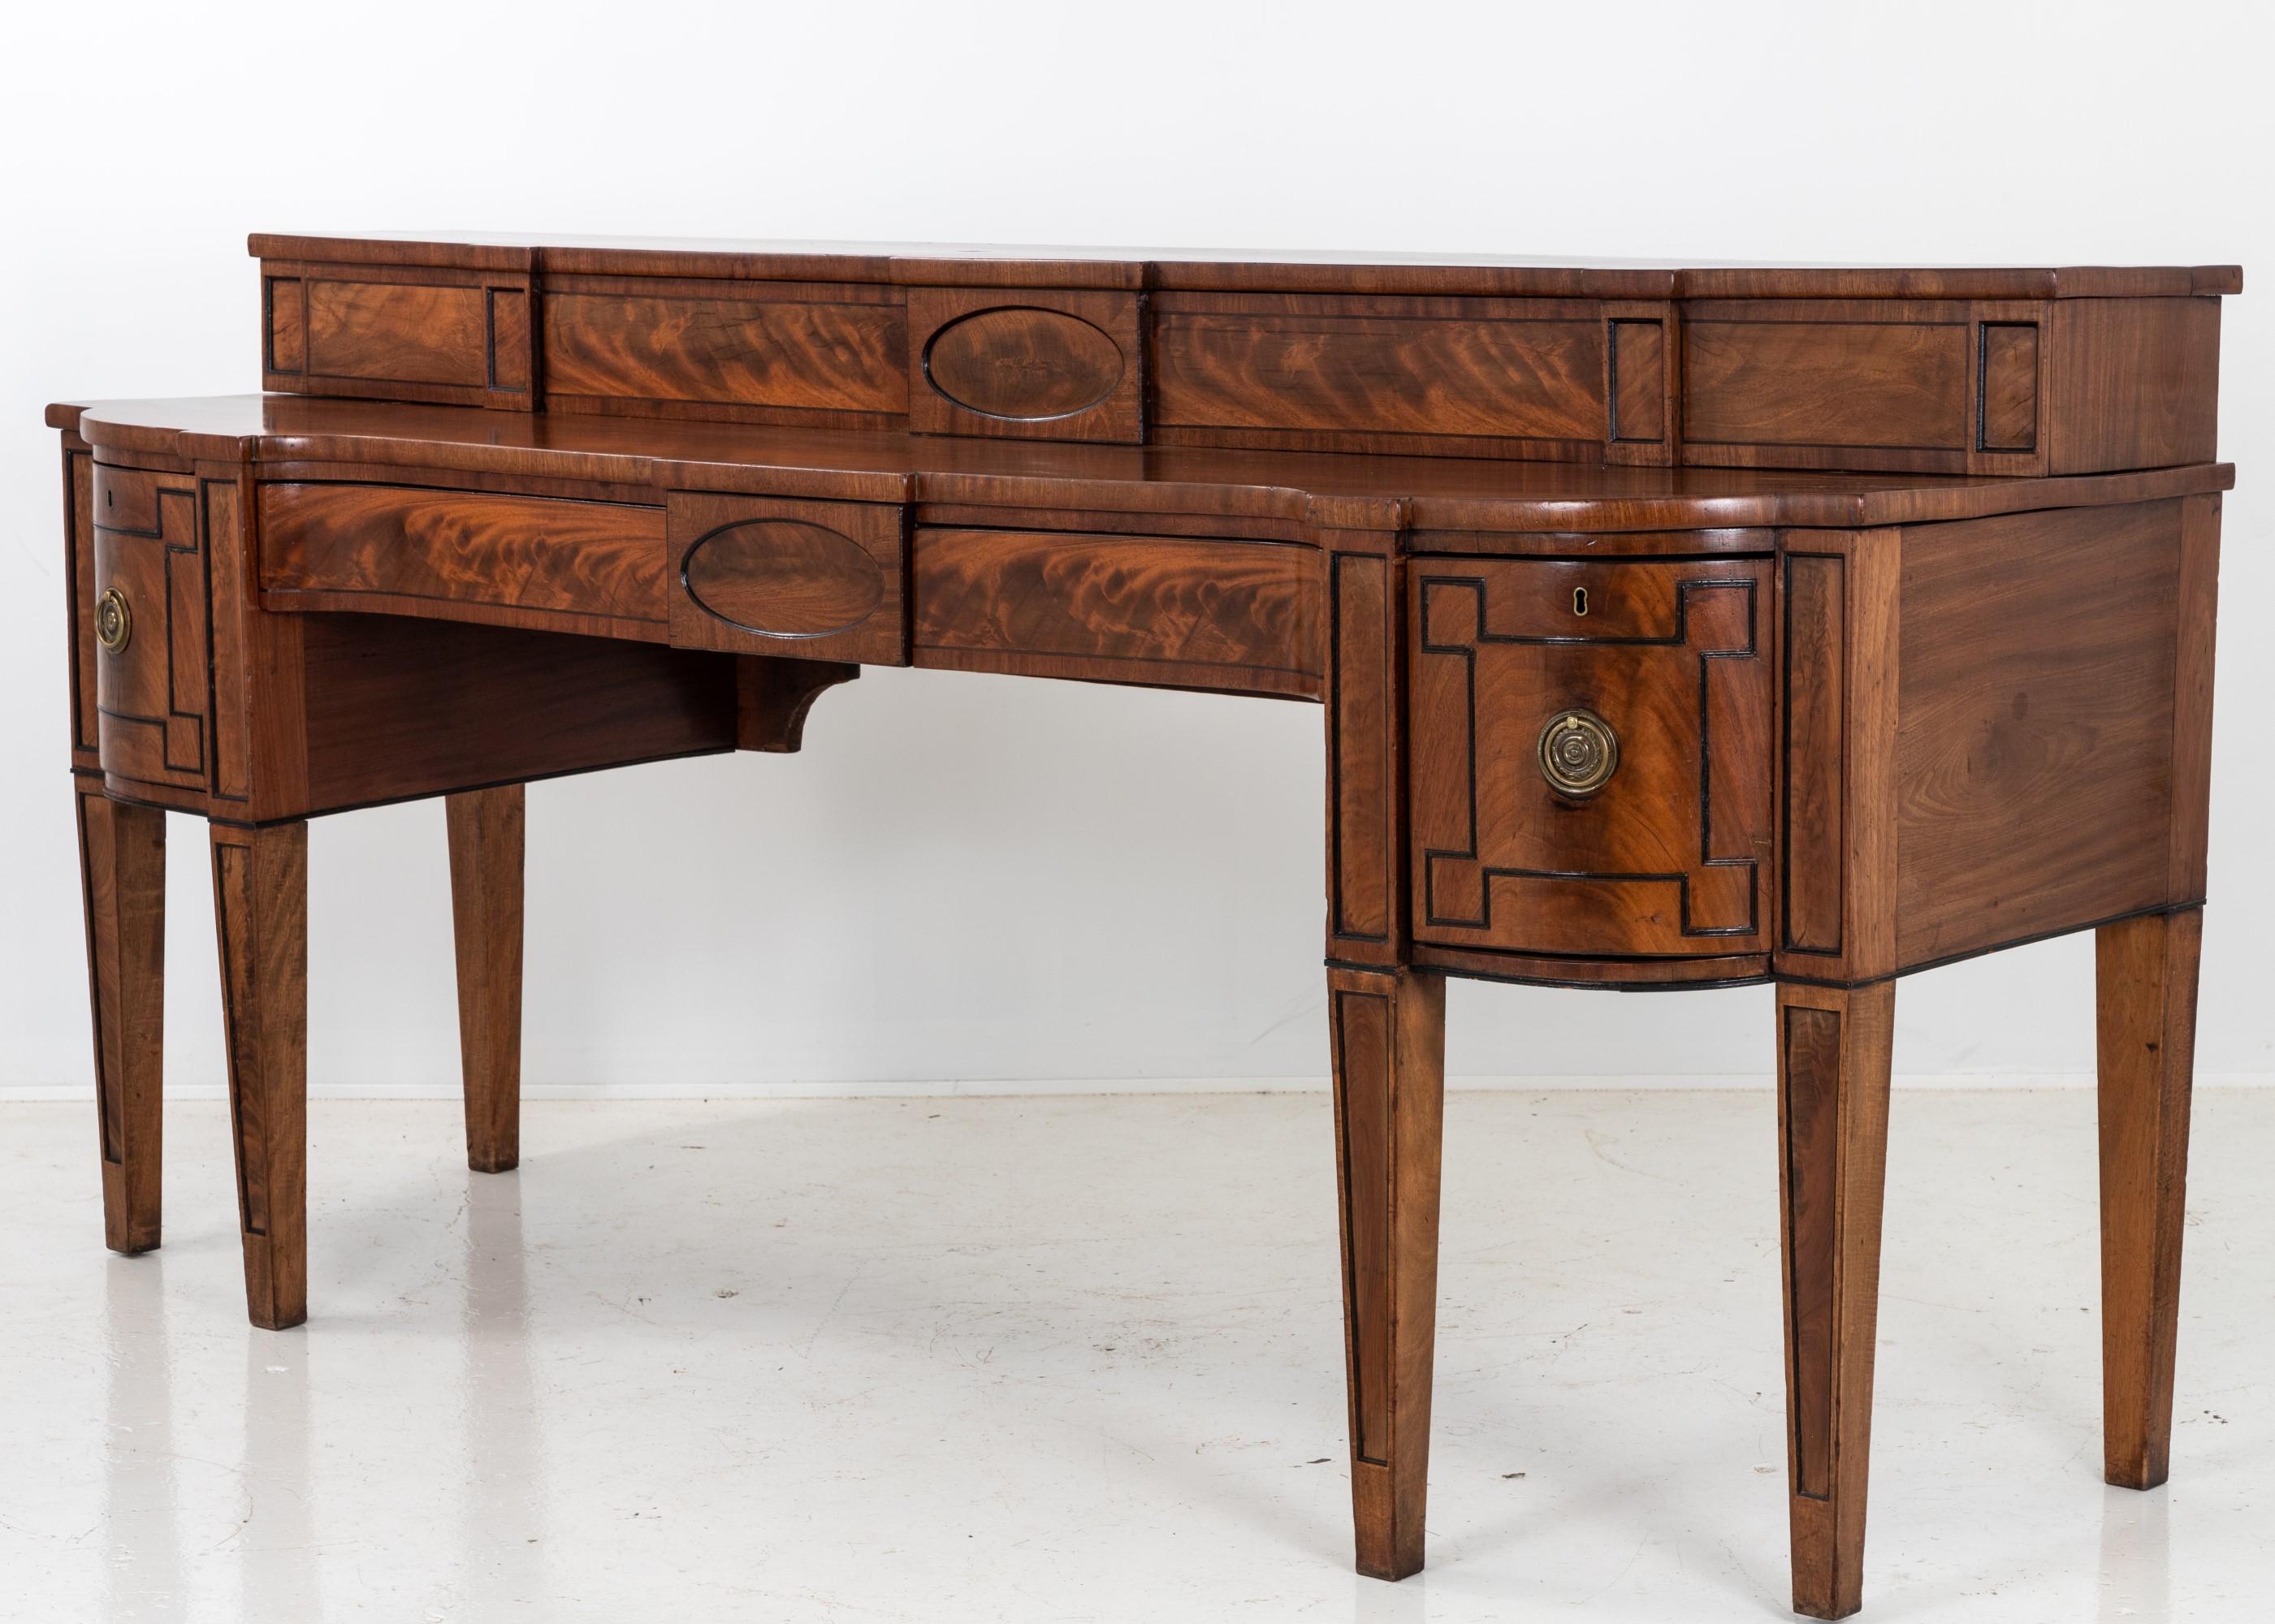 A generous sized George III Scottish-made mahogany bow-front sideboard. Featuring a setback upper section or hutch with hidden storage. Mahogany overlay and with oval inlaid sections. Square tapered legs. Height to lower level is 37.5